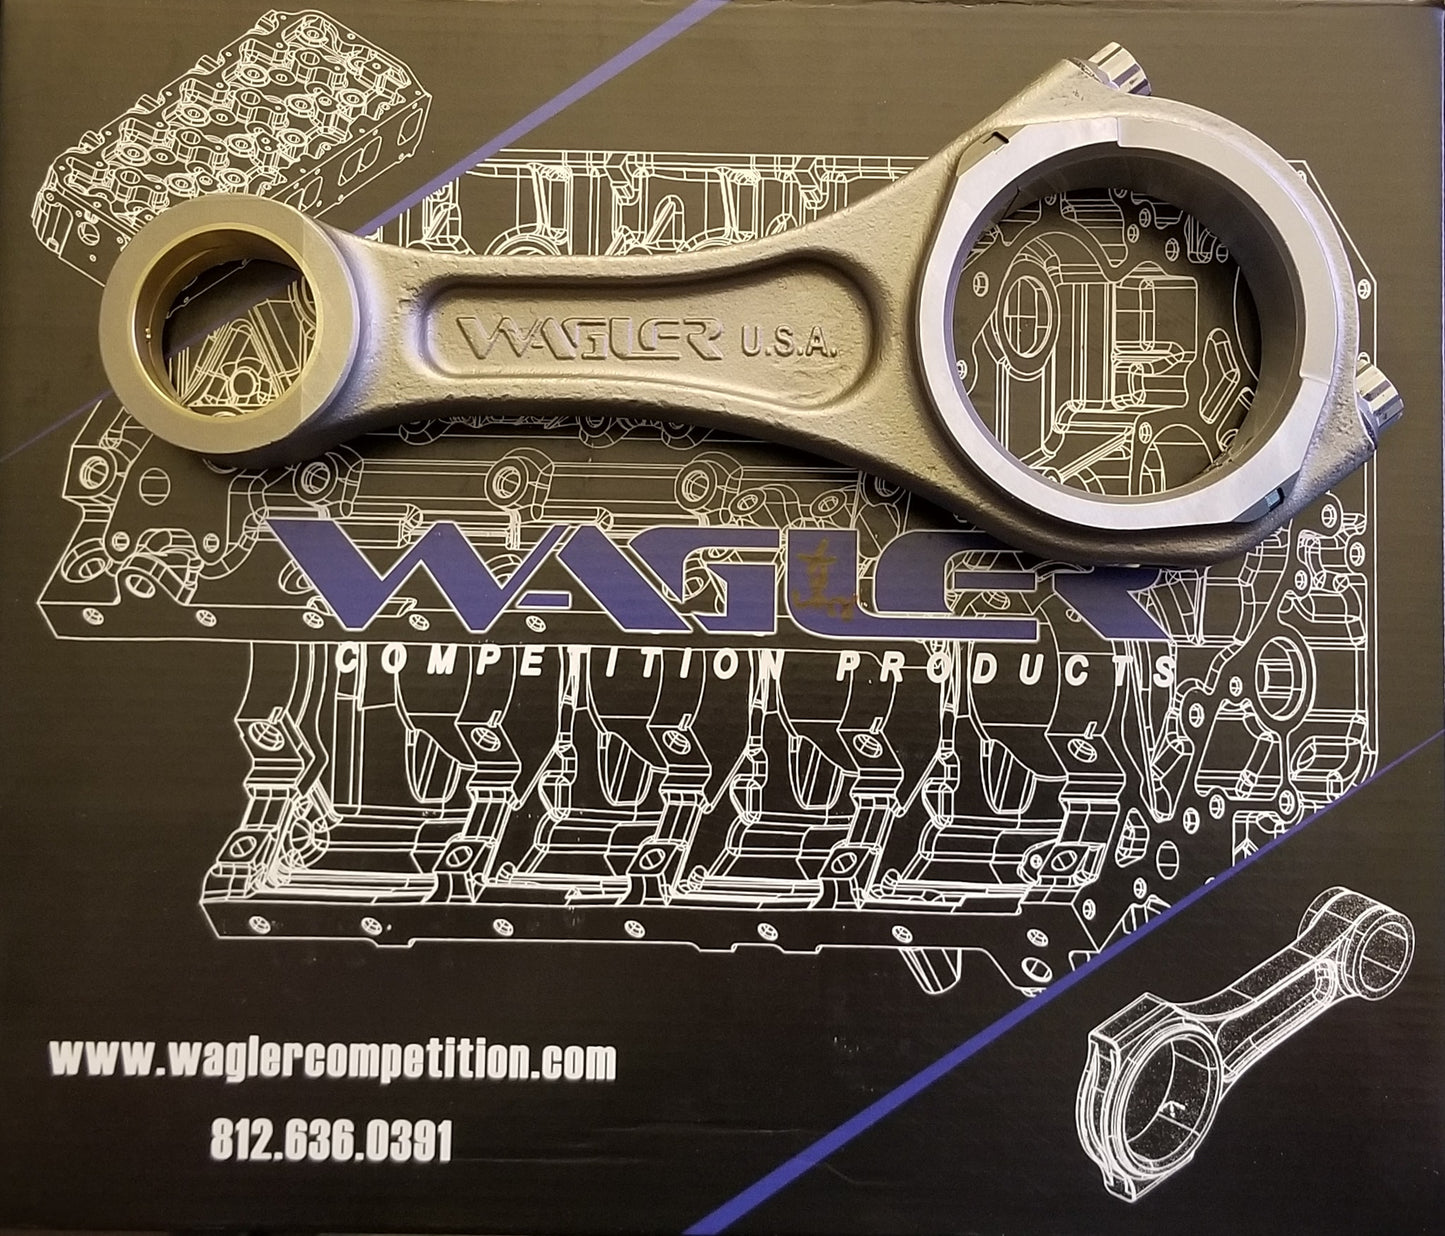 CRD5.9/6.7ST Wagler Cummins Street Fighter Connecting Rods Hell On Wheels Ltd Canada